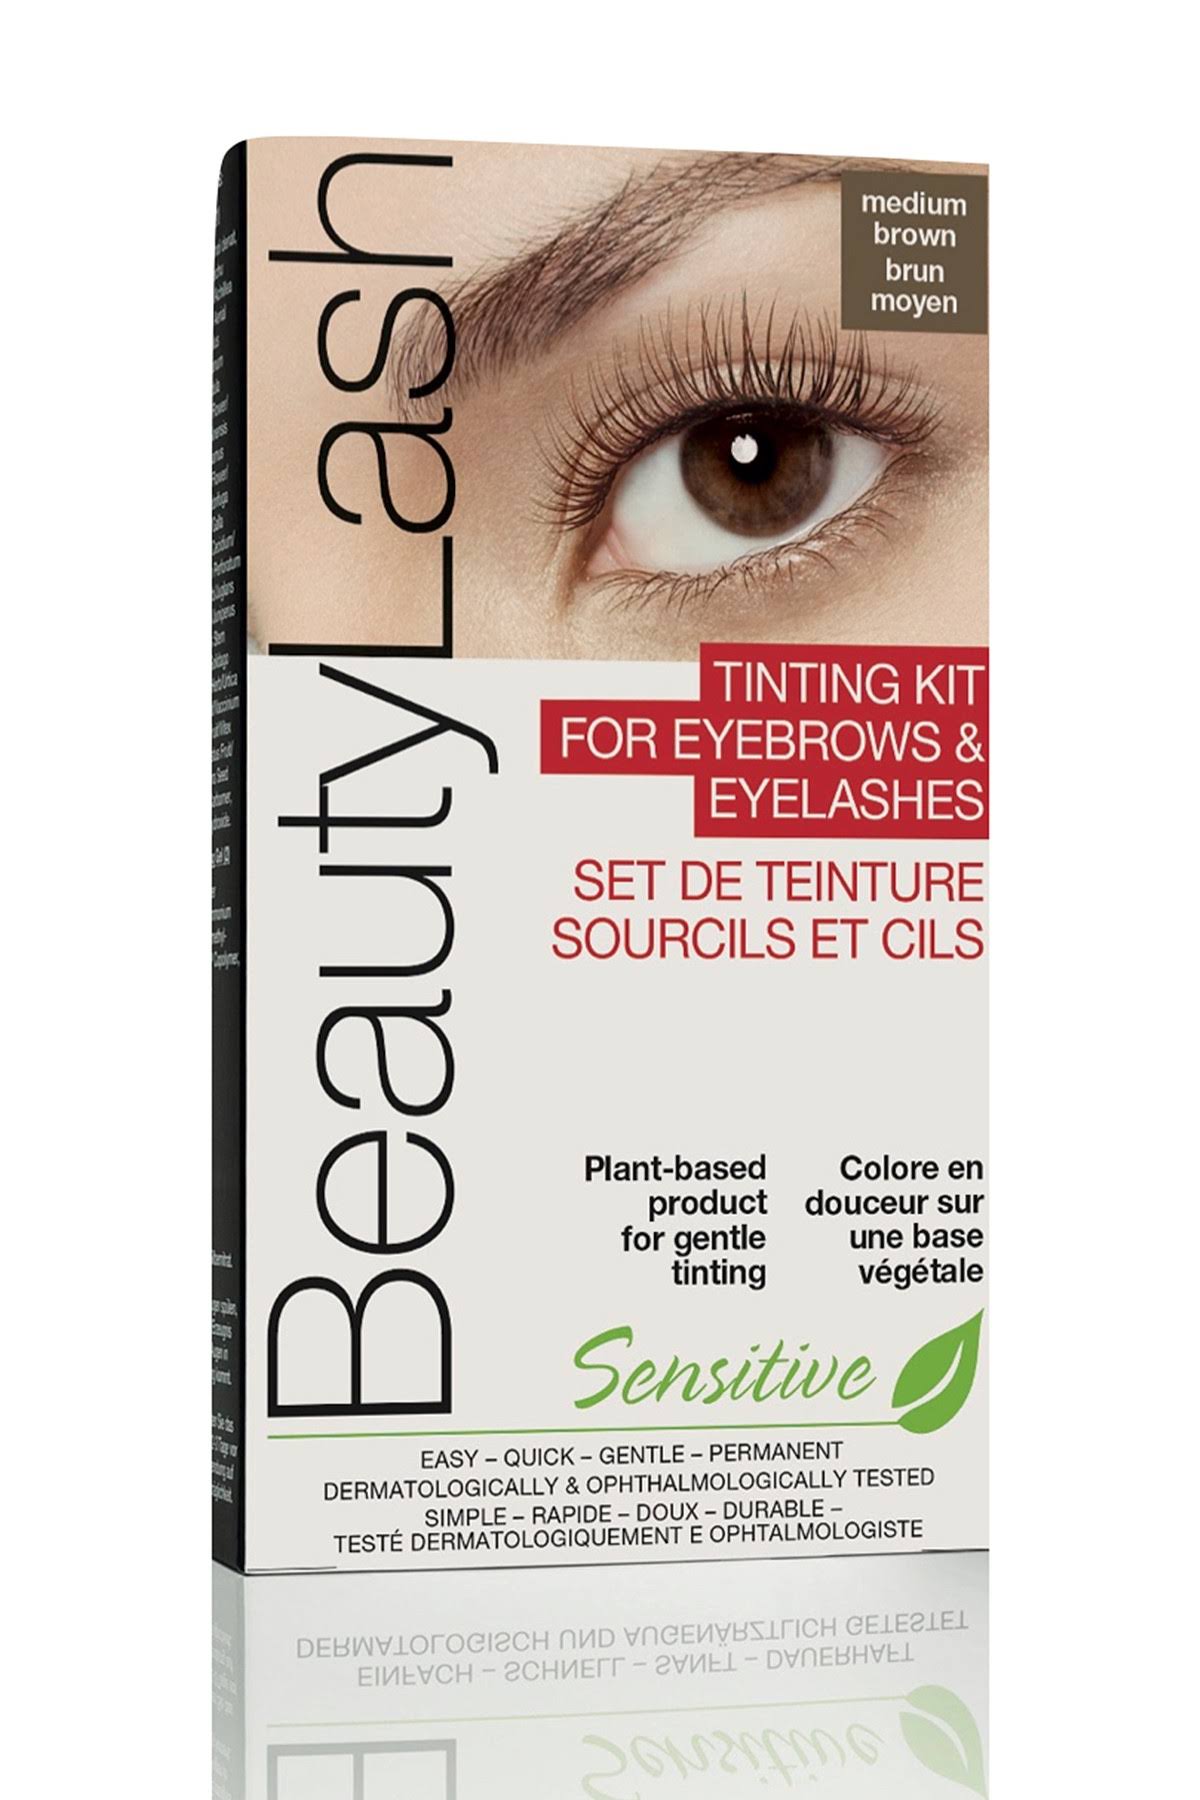 BeautyLash Long Lasting Home Tinting Kit for Brows and Lashes, Medium Brown